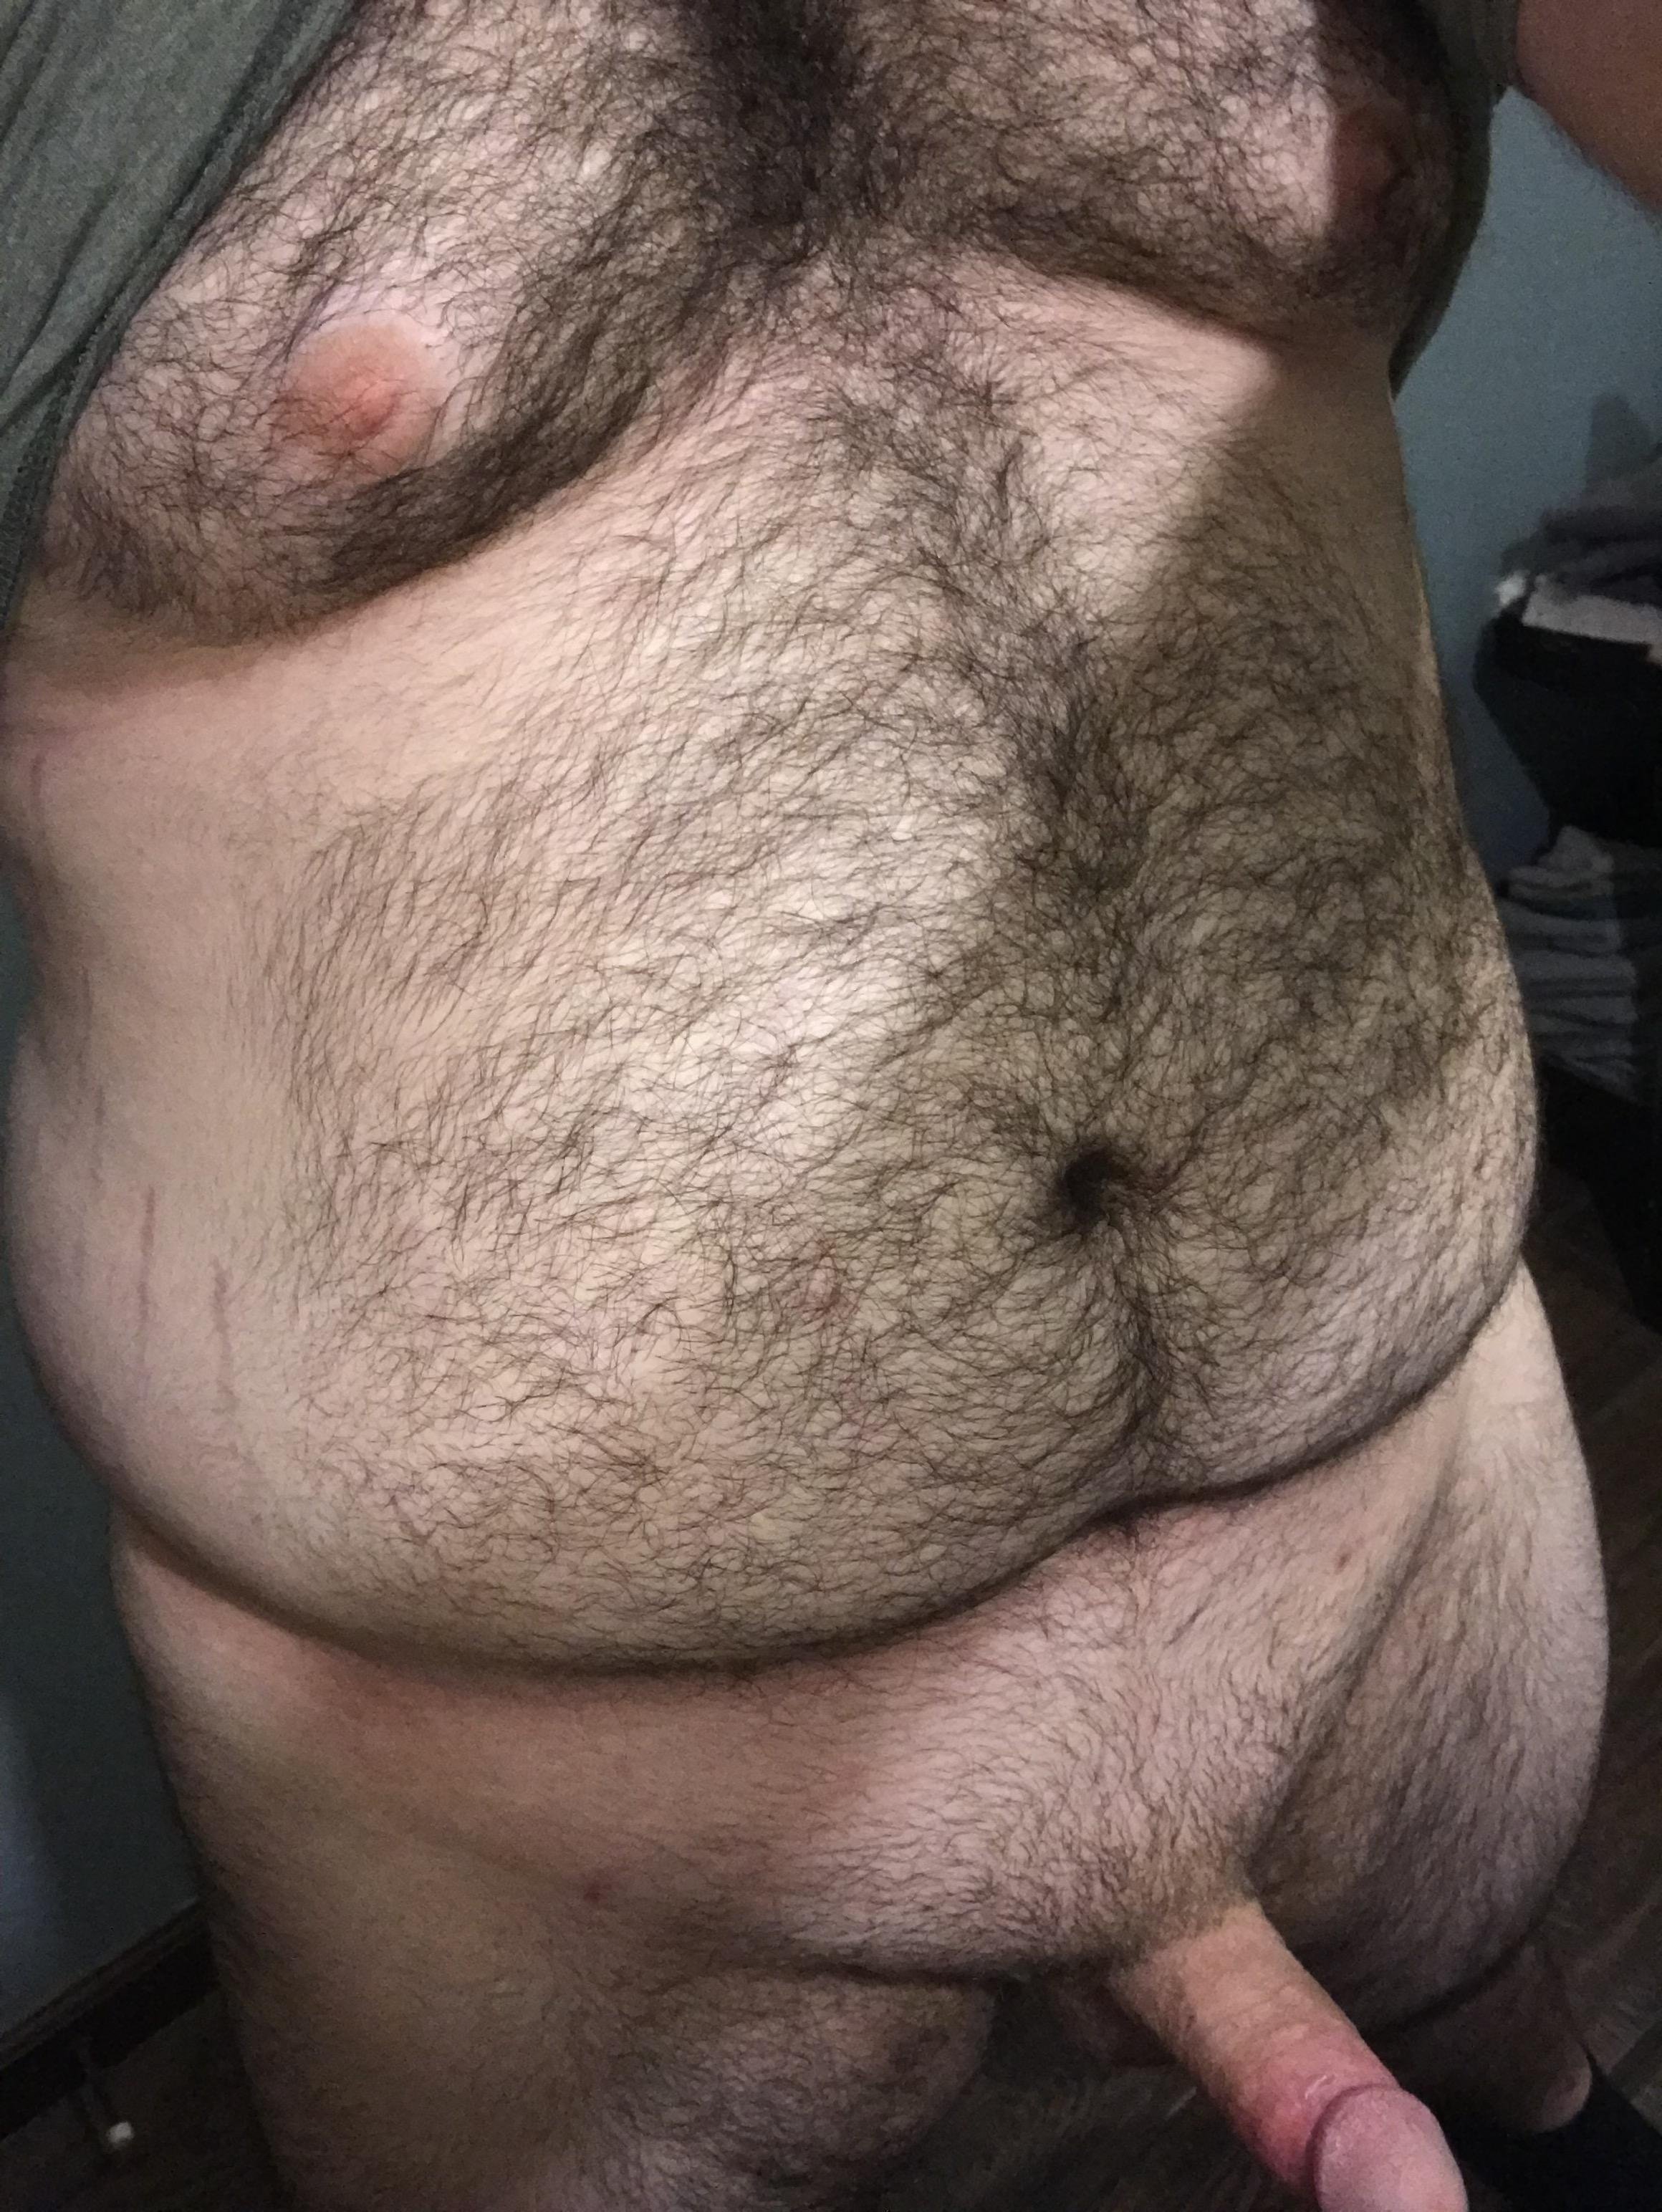 24 m. Hairy cub. Vers bottom. First post. Be nice. Pms welcome. Would love to chat or cam maybe. Especially if you’re a thick bear with a thick cock